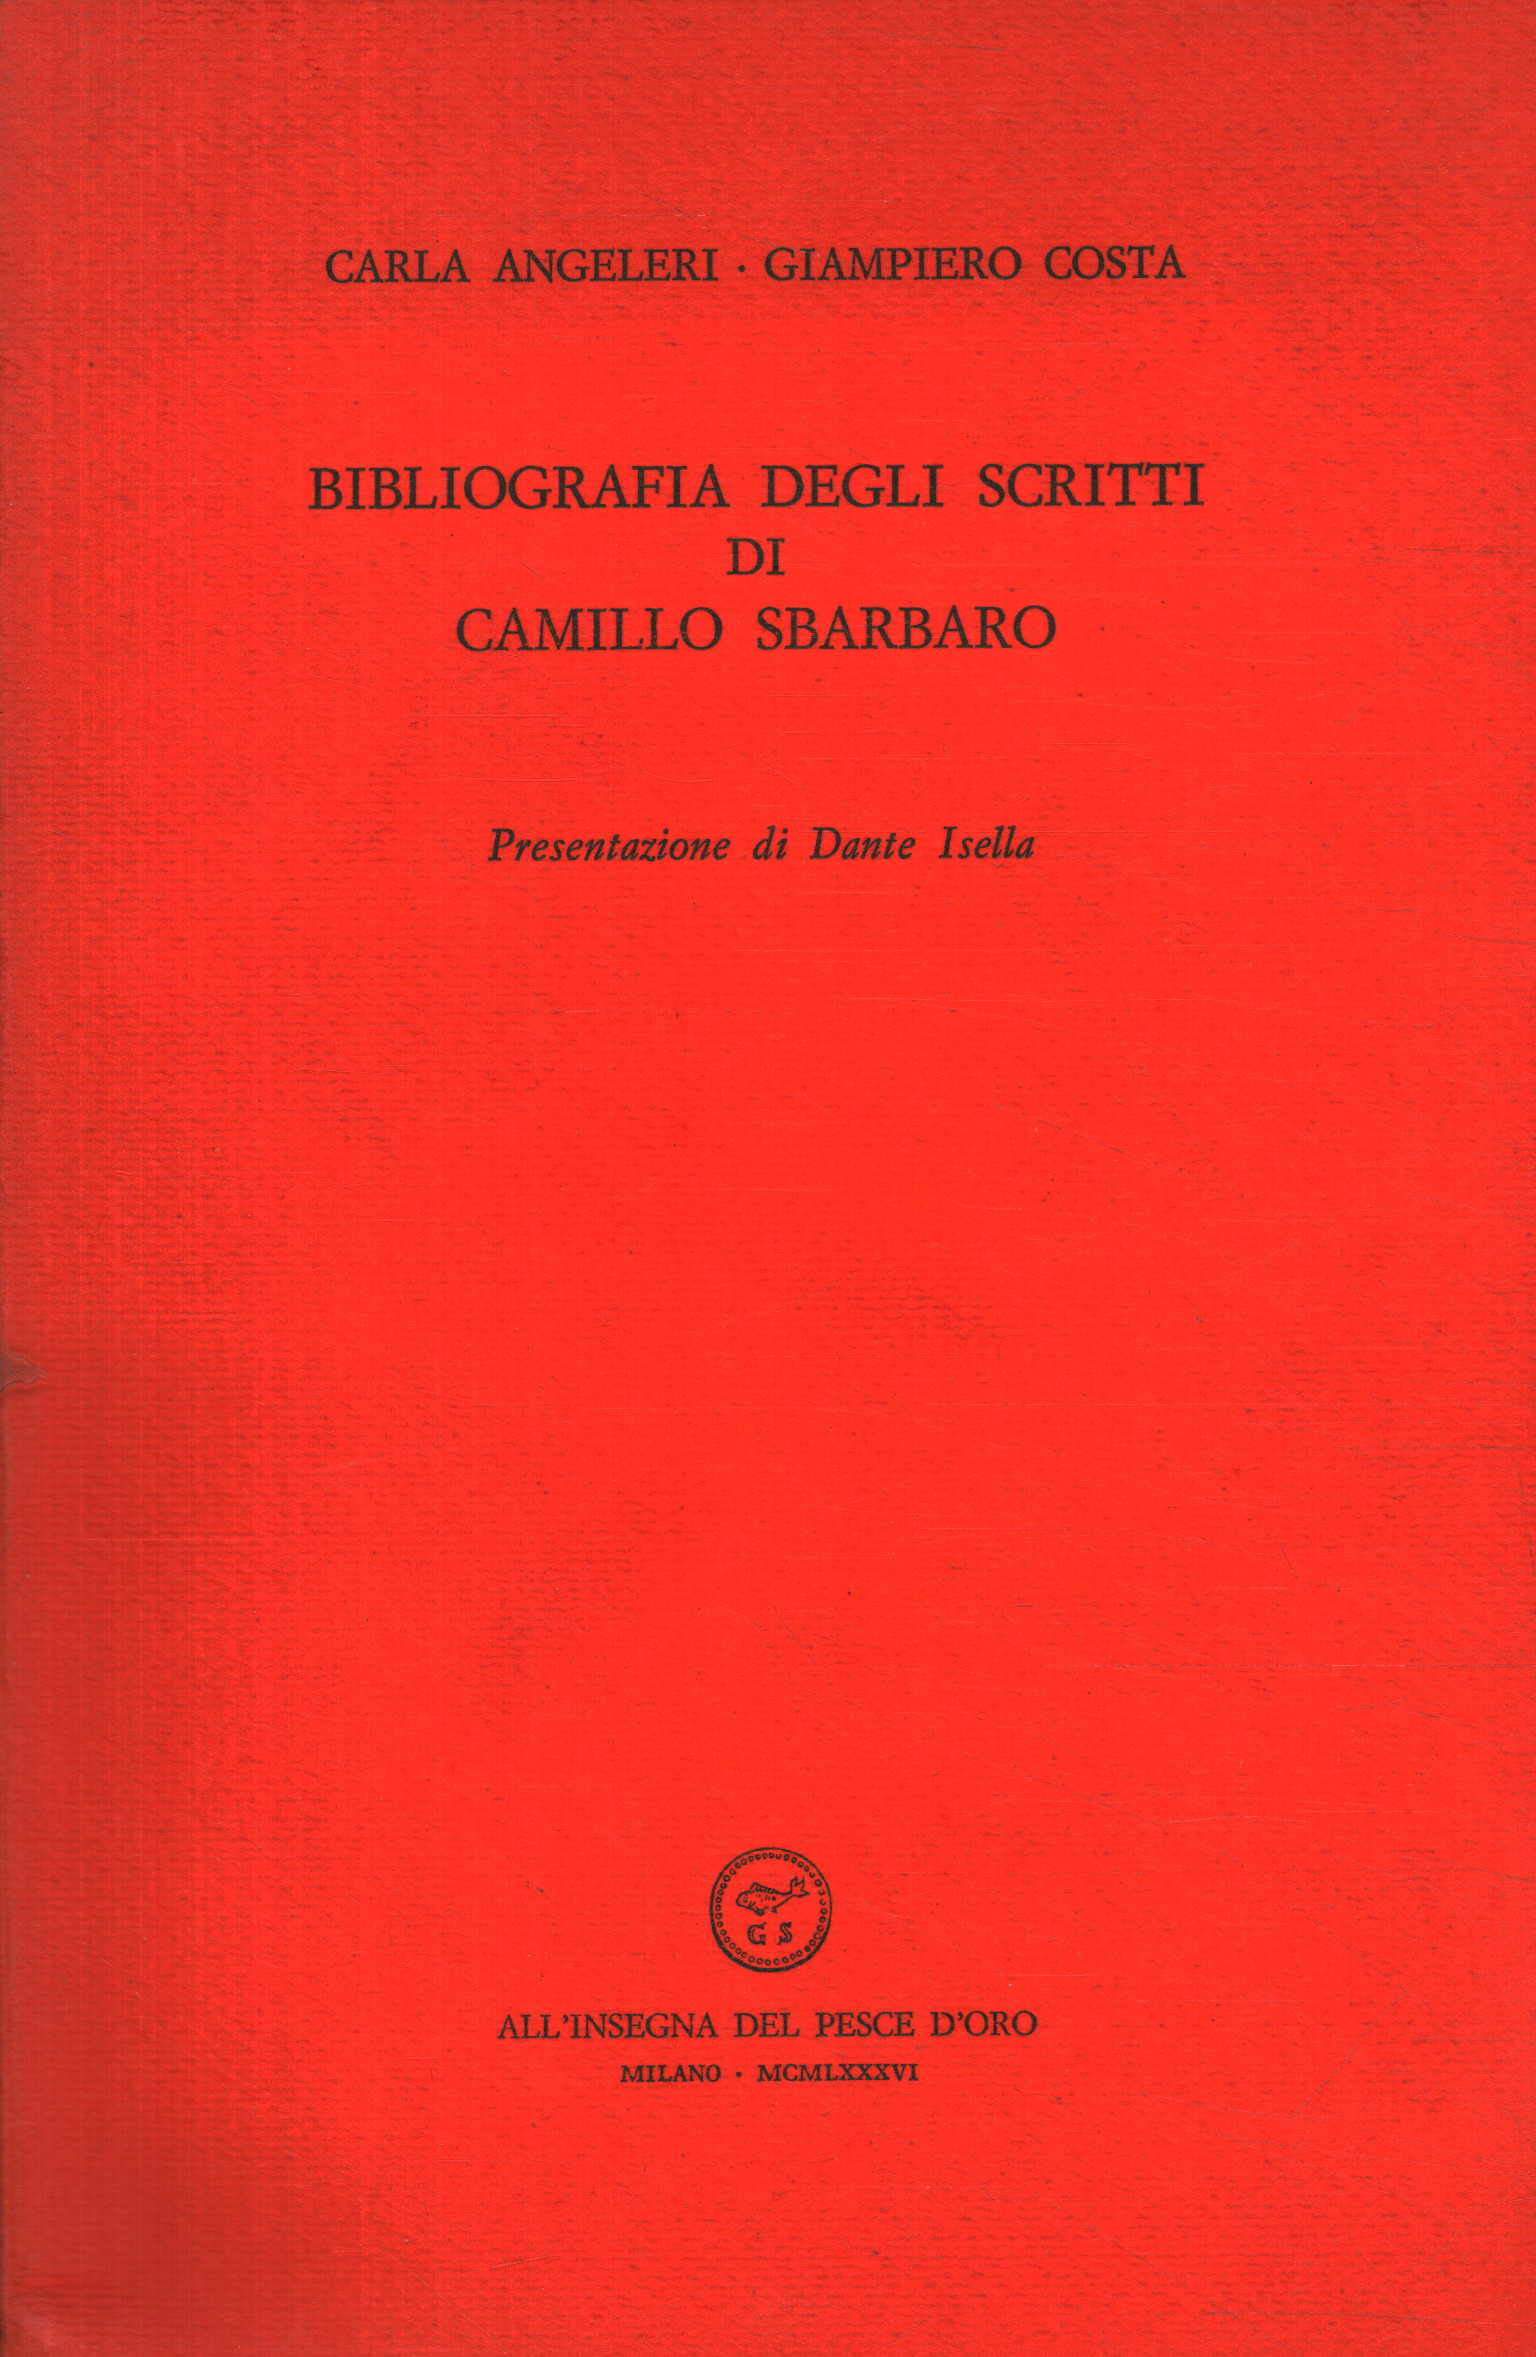 Bibliography of the writings of Camillus Sb